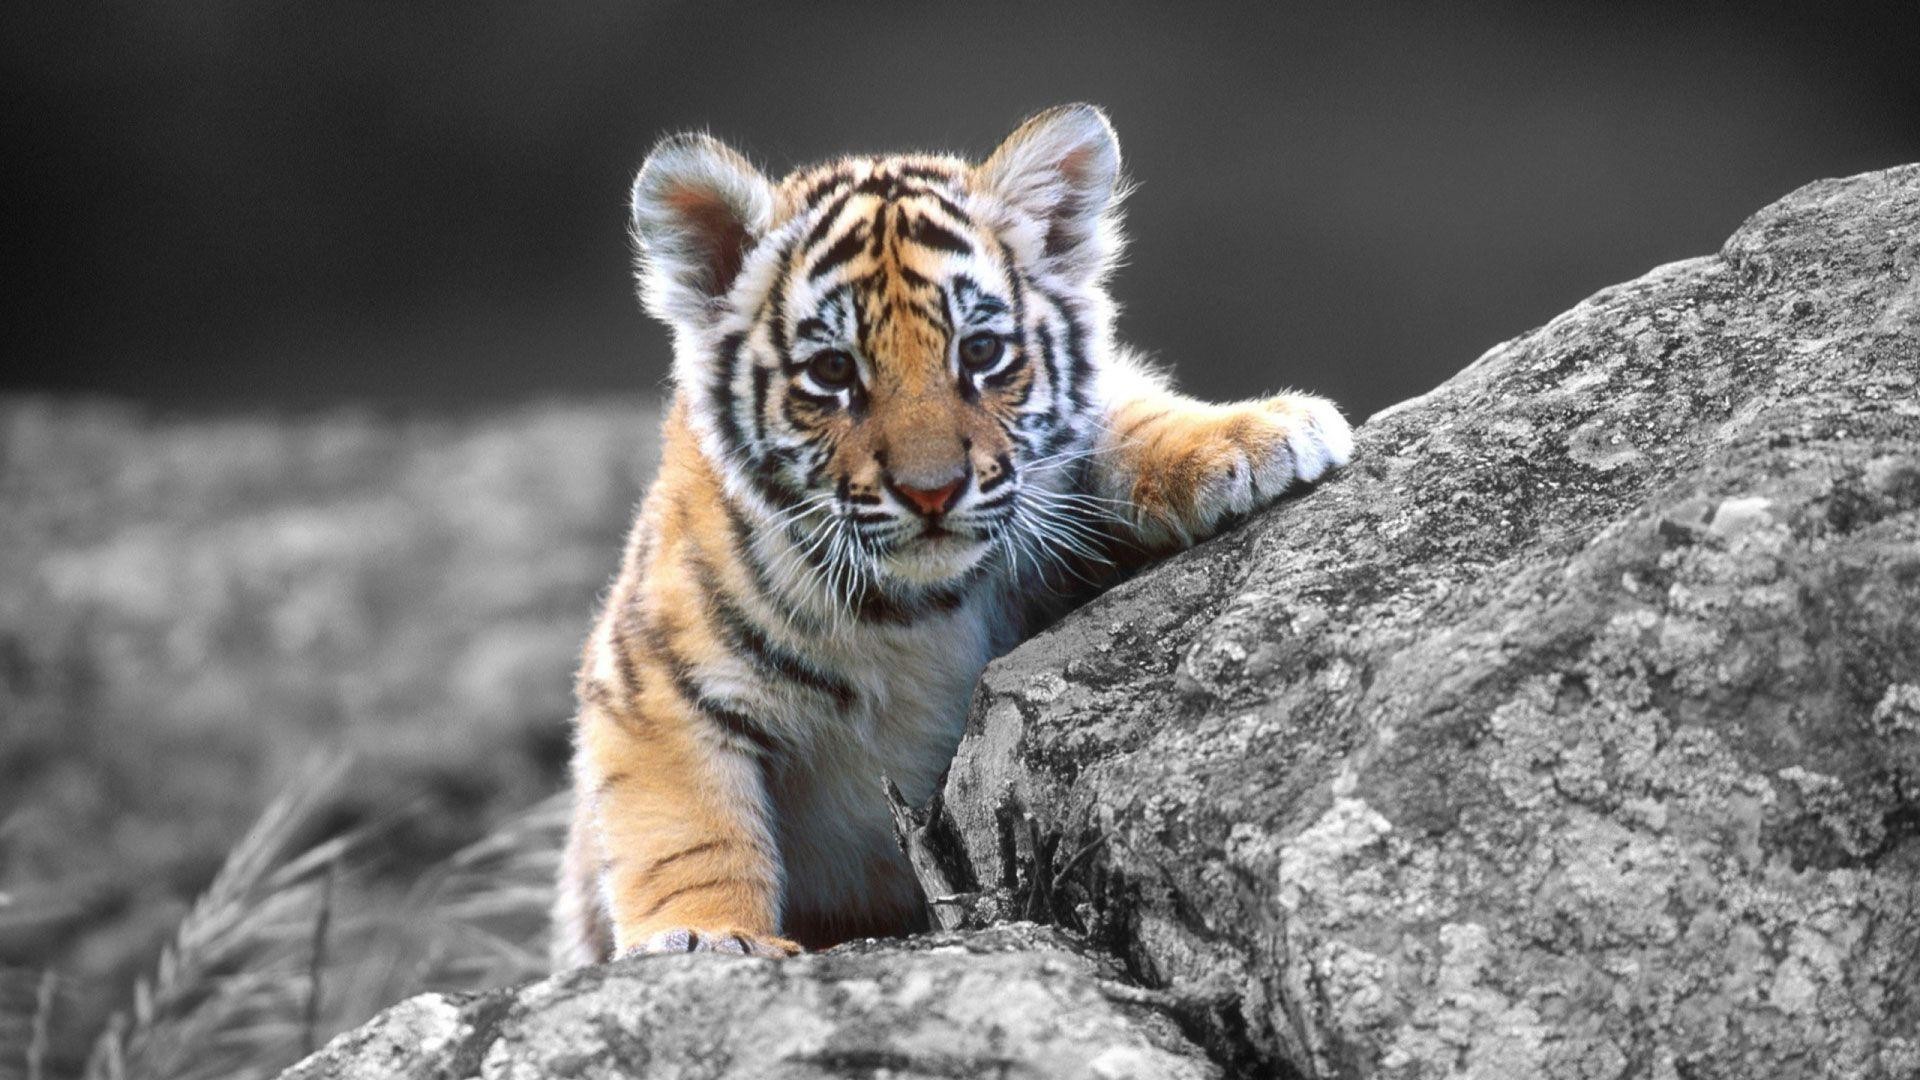 1920x1080 Tiger Pictures | Cute animal pictures and videos blog